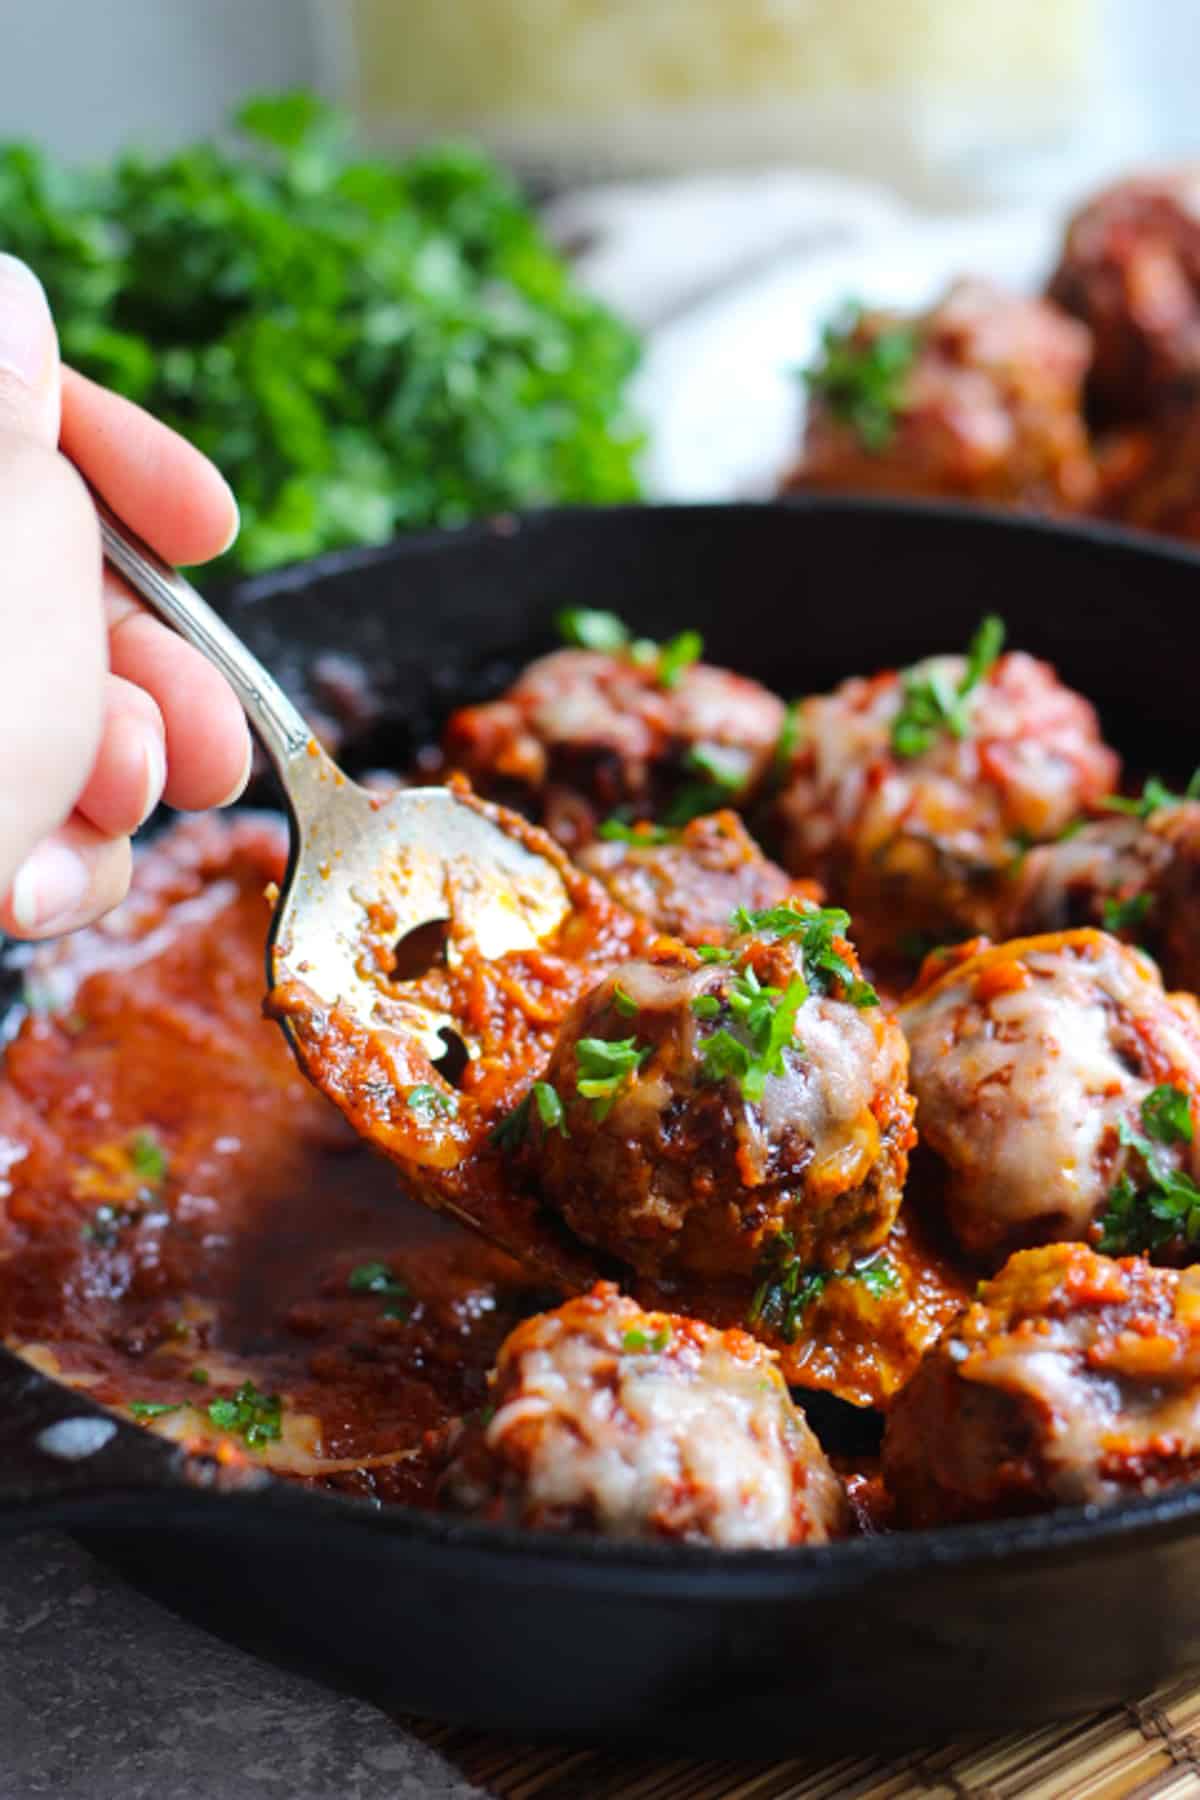 Homemade Italian meatballs are perfect for dinner. These are made with ground beef and are so juicy and tender. Cooked in tomato sauce and topped with mozzarella, you can enjoy these meatballs in a sub, with salad, potatoes or pasta! So easy and simple to make and they're perfect for meal prep. 